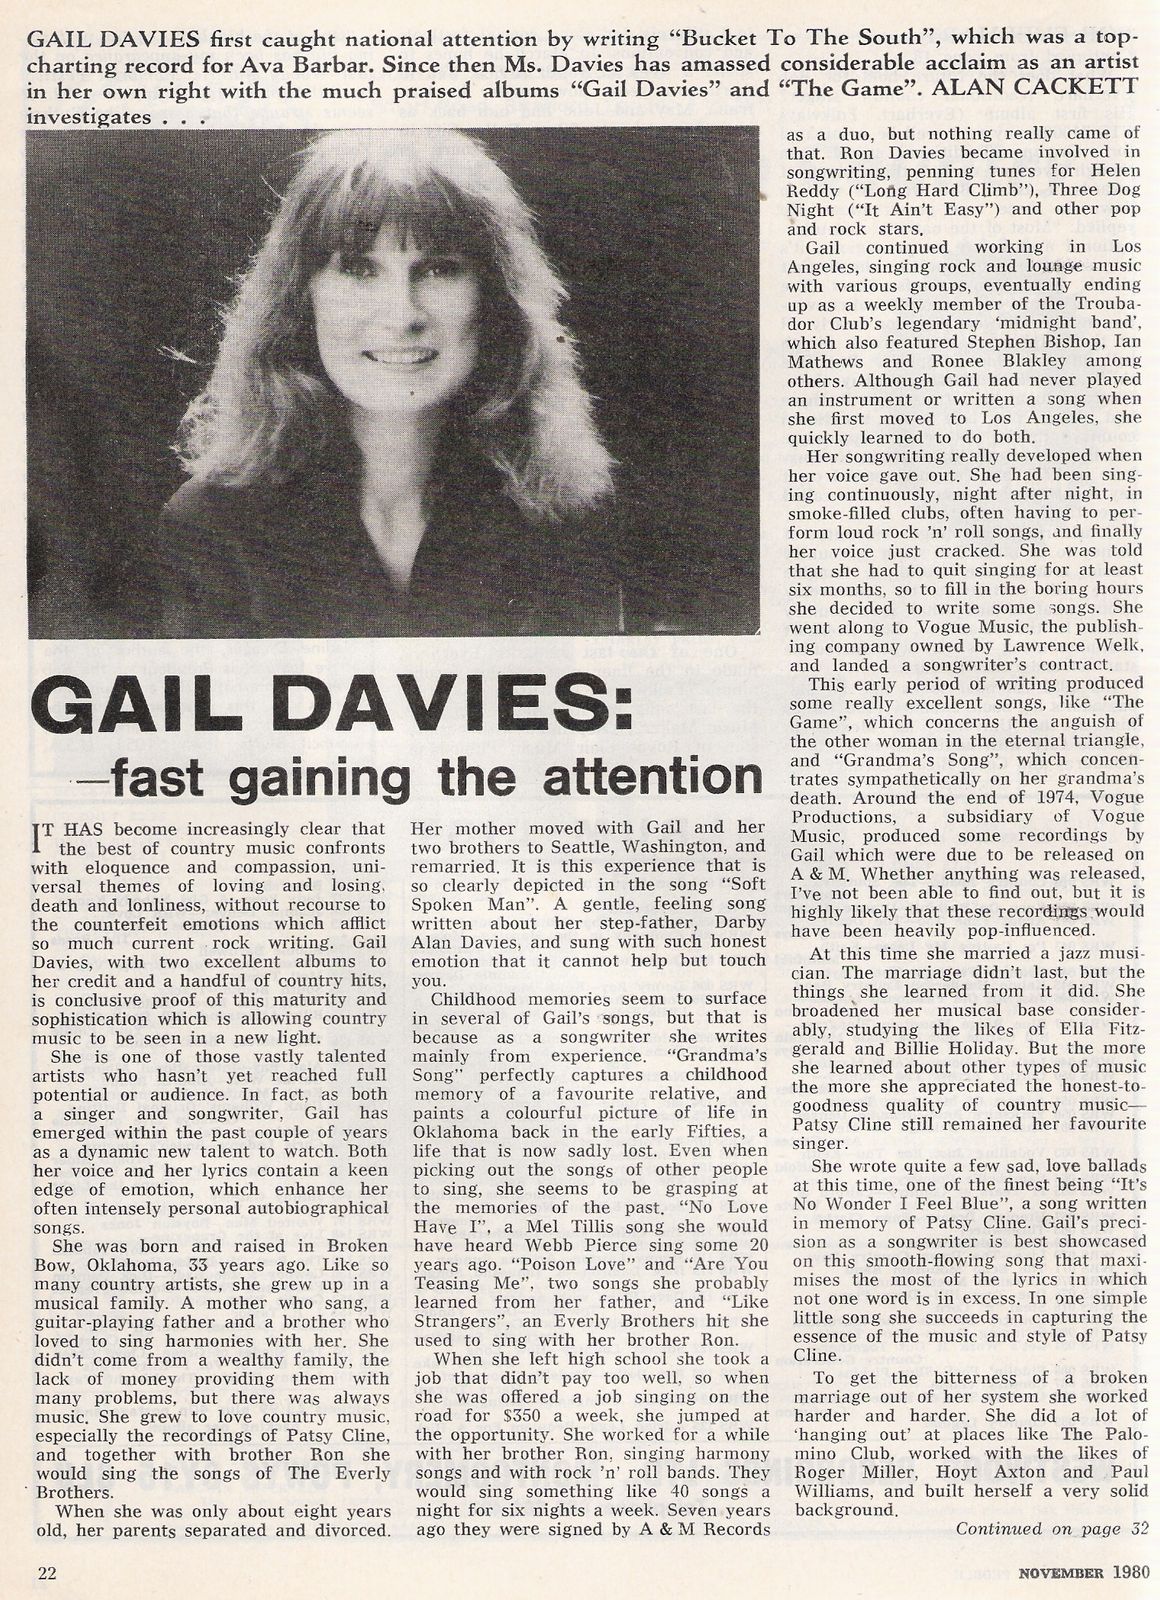 Alan Cackett - Gail Davies …Fast Gaining The Attention